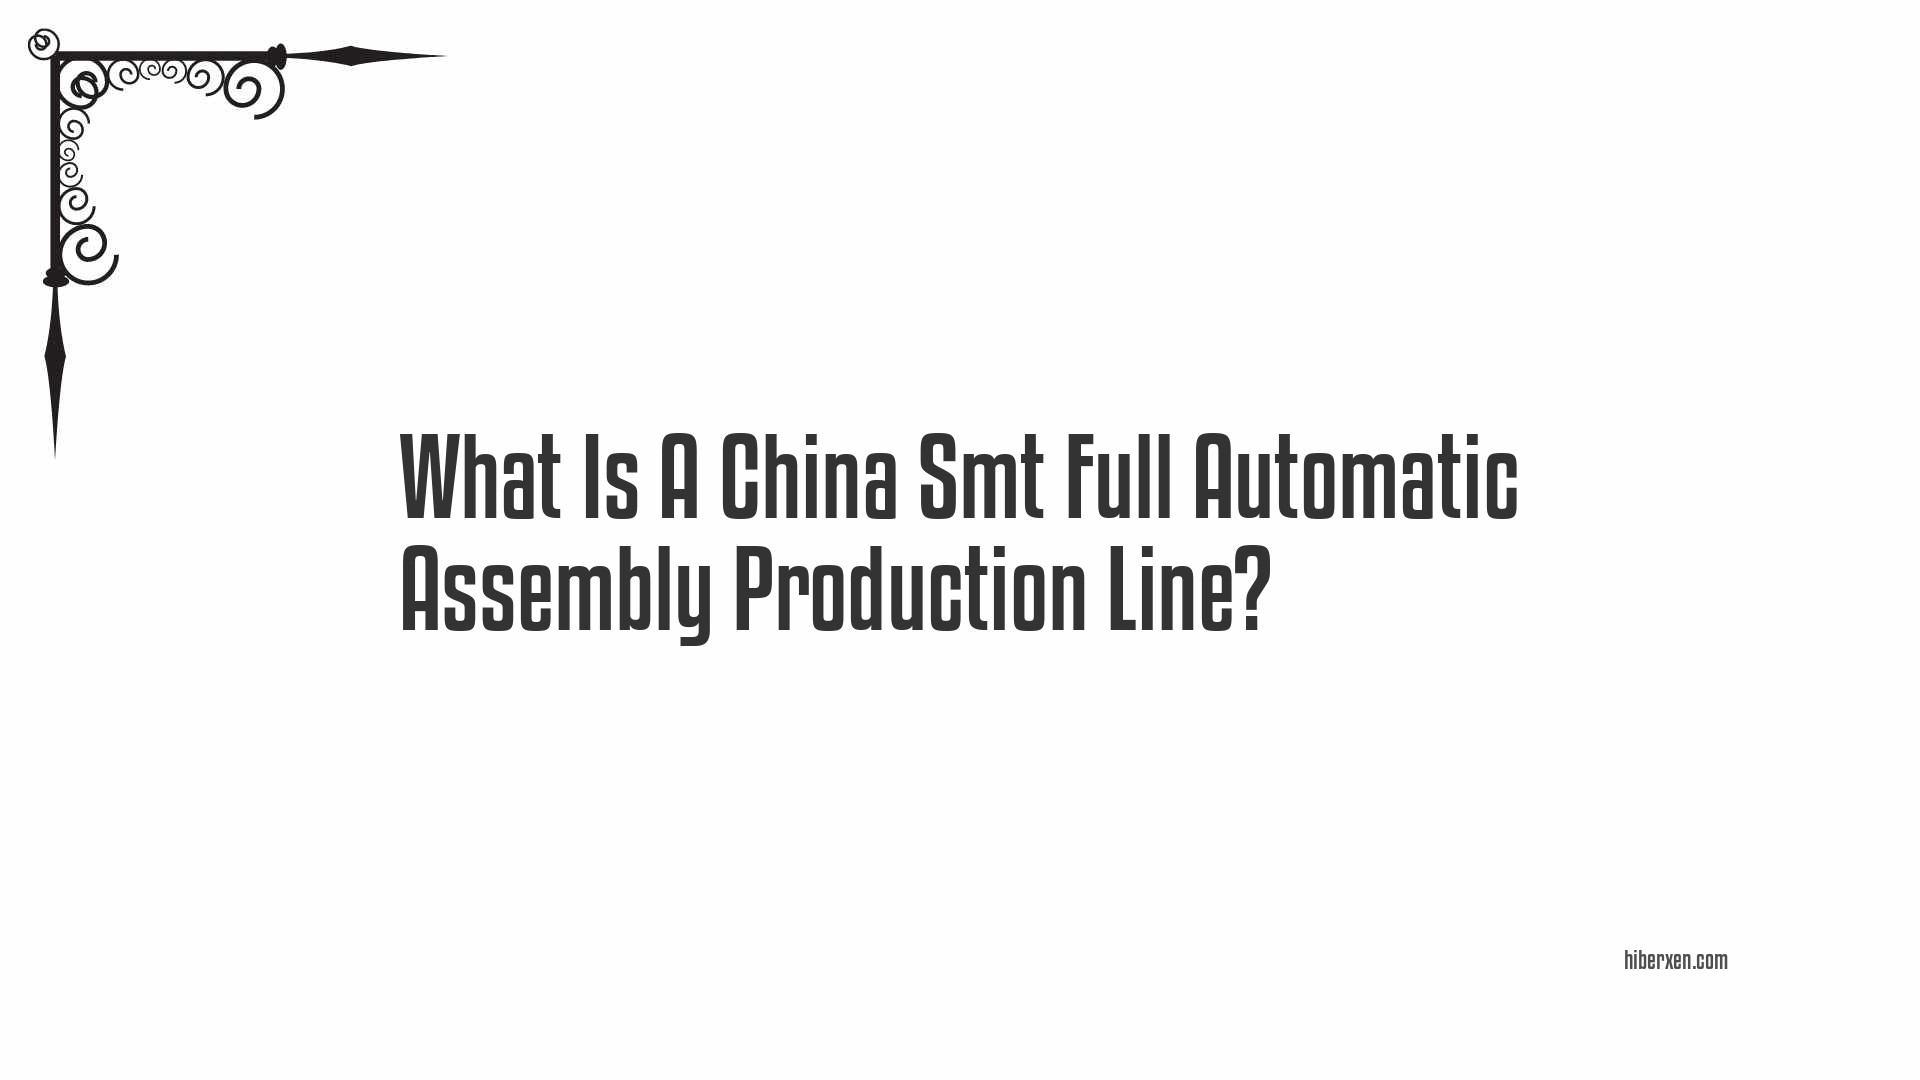 What Is A China Smt Full Automatic Assembly Production Line?